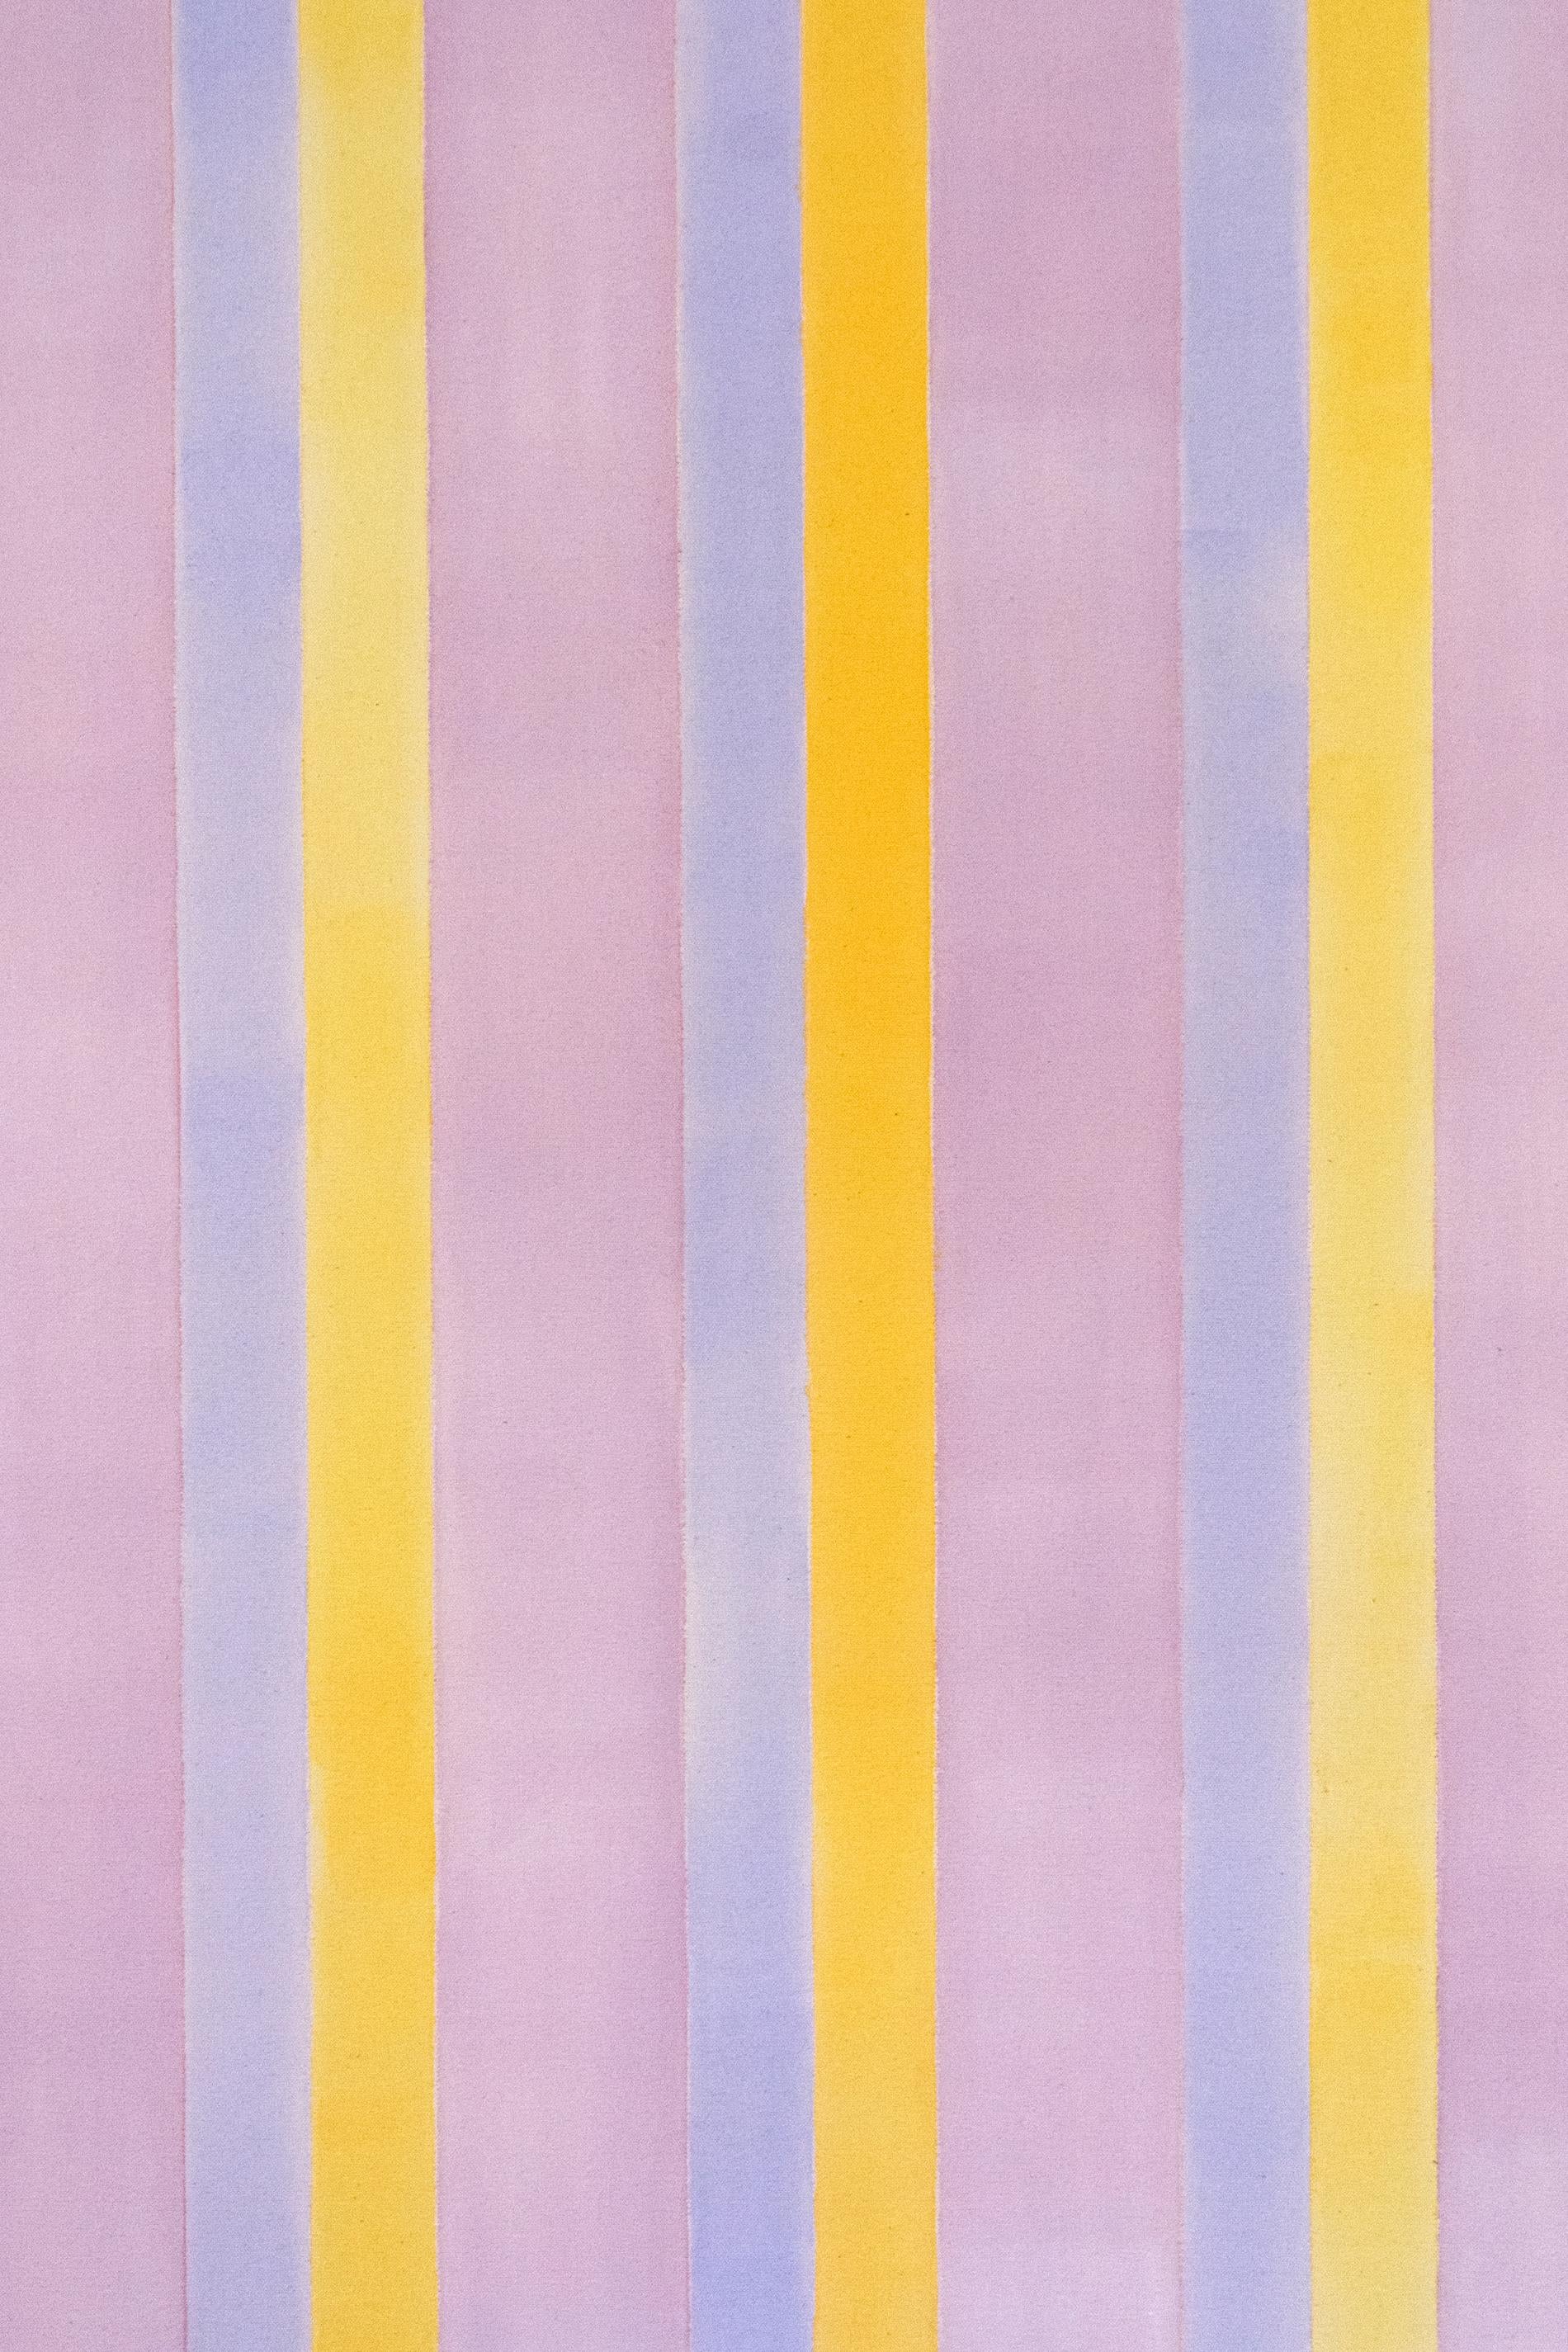 Evening Light - Twinned vertical bands in lilac and golden yellow - Painting by Milly Ristvedt